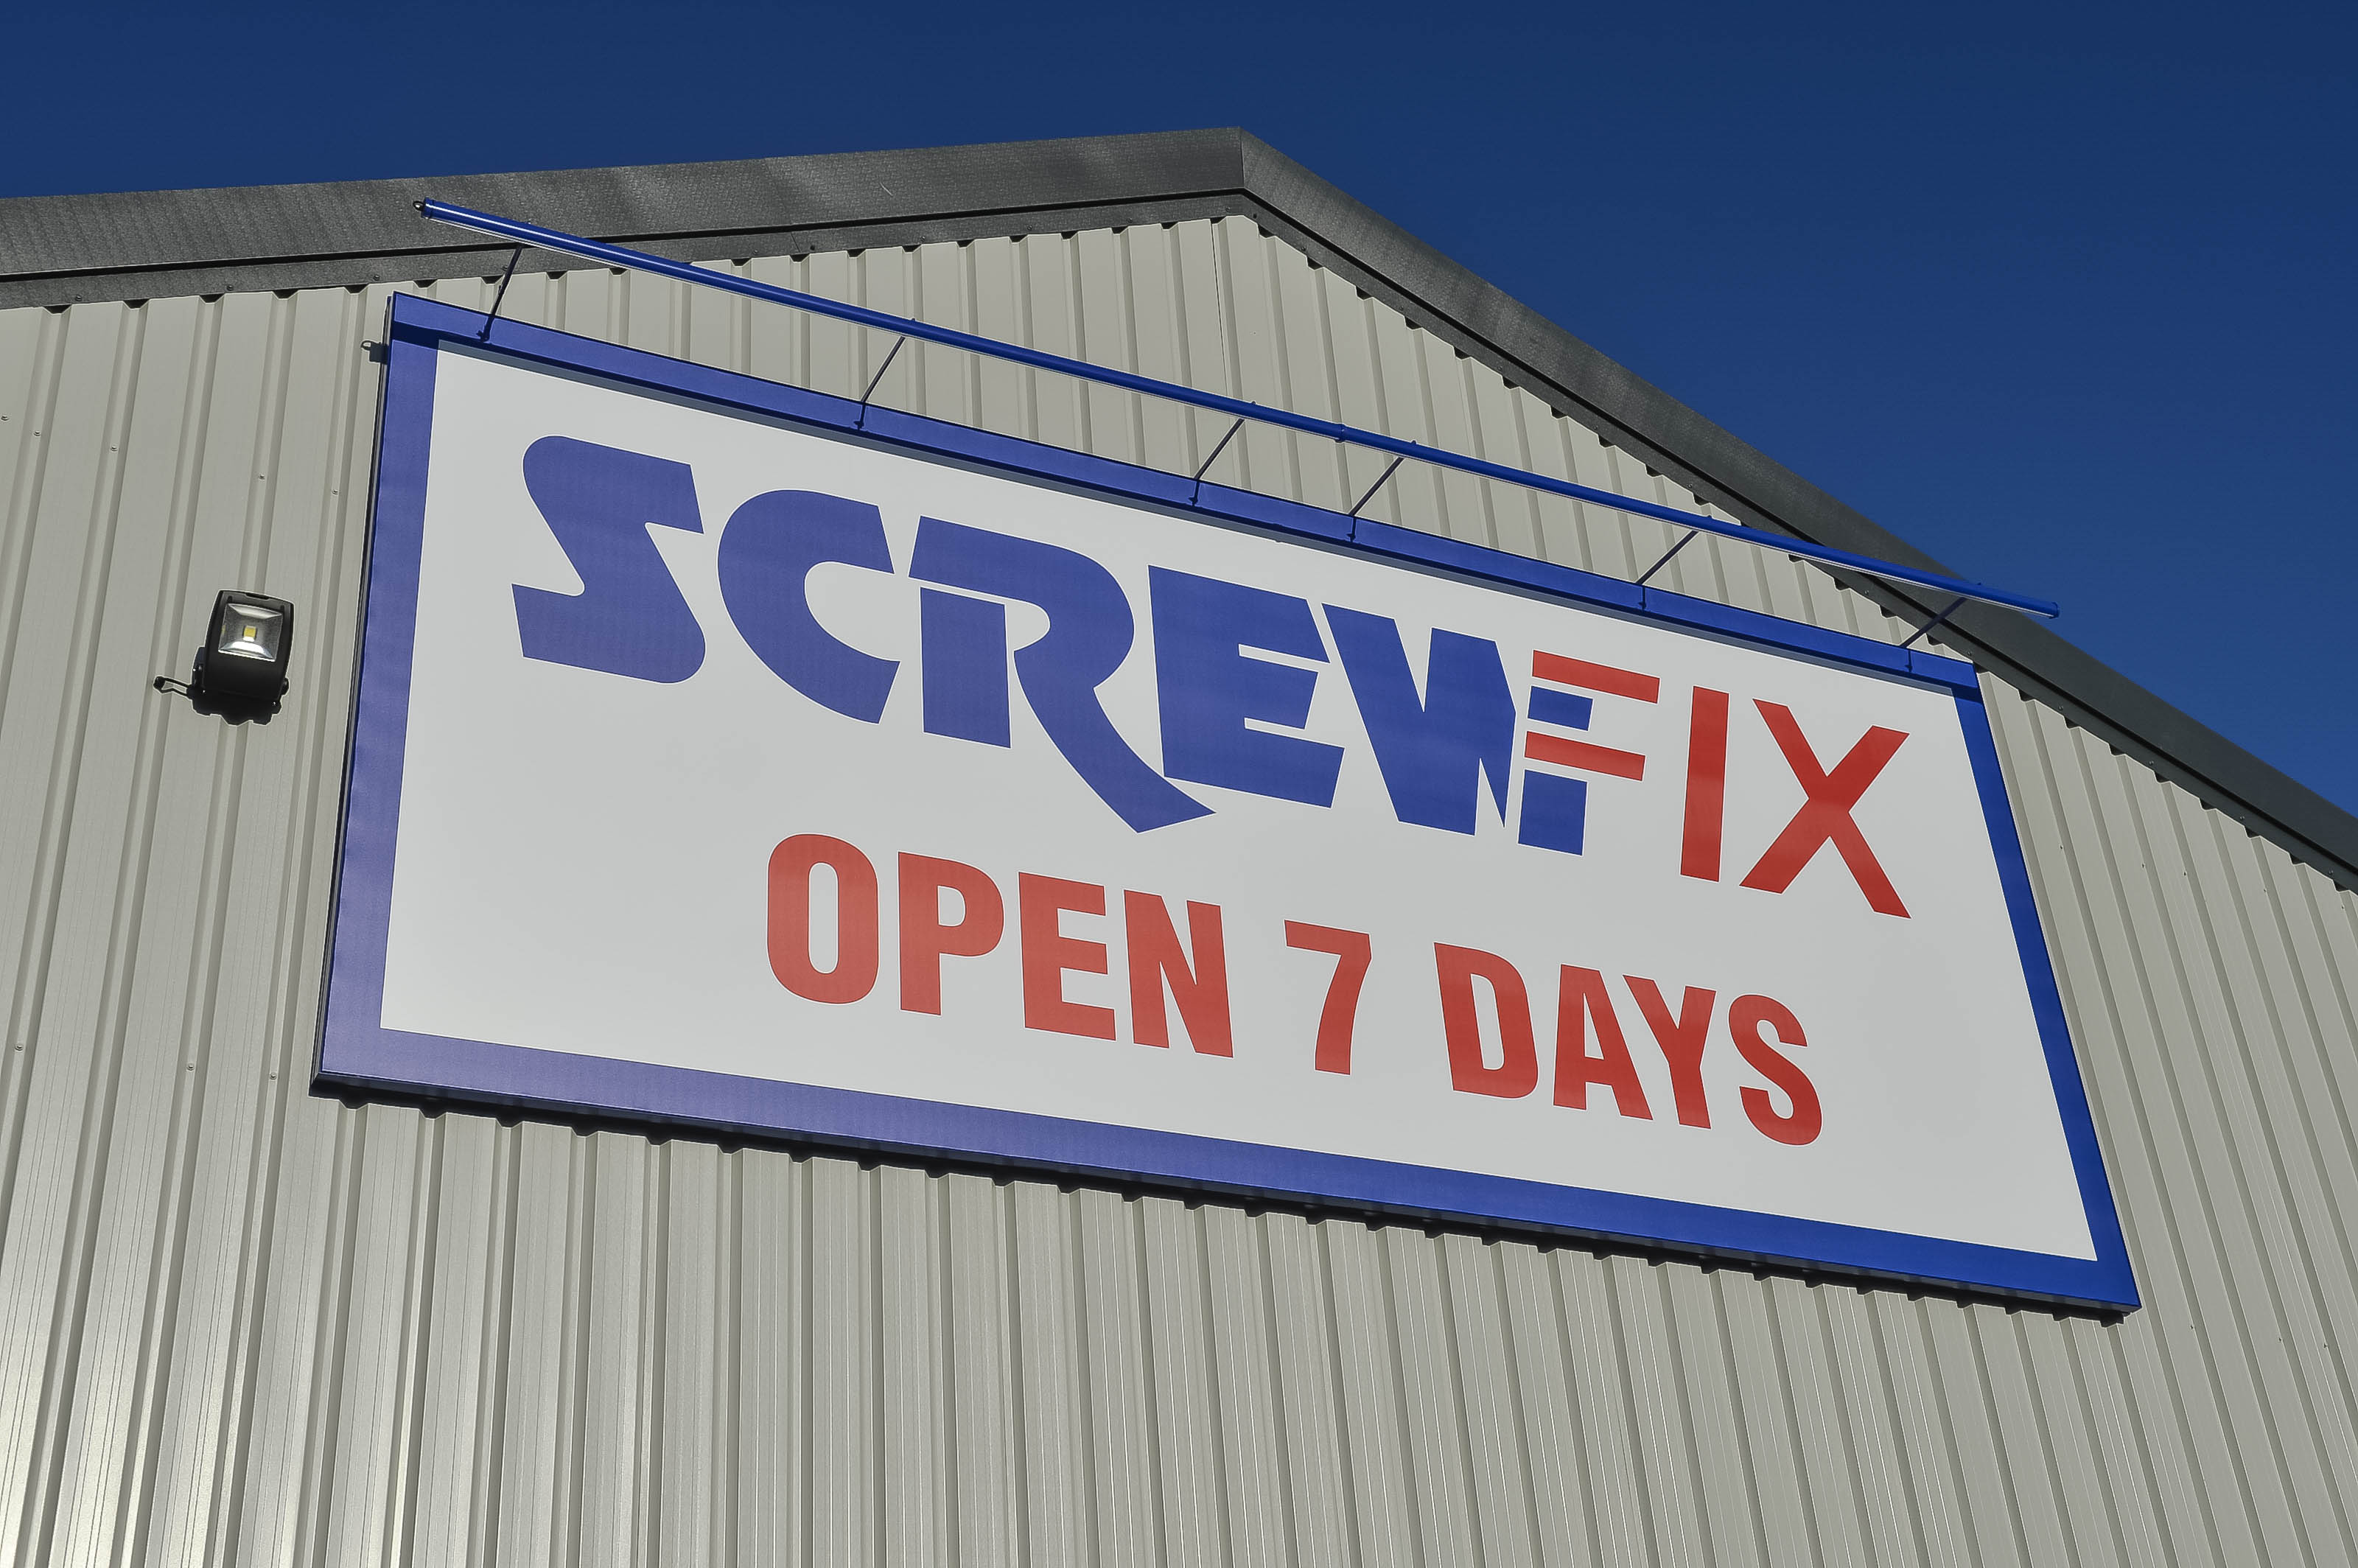 Jobs boost for Ruislip as new Screwfix store opens